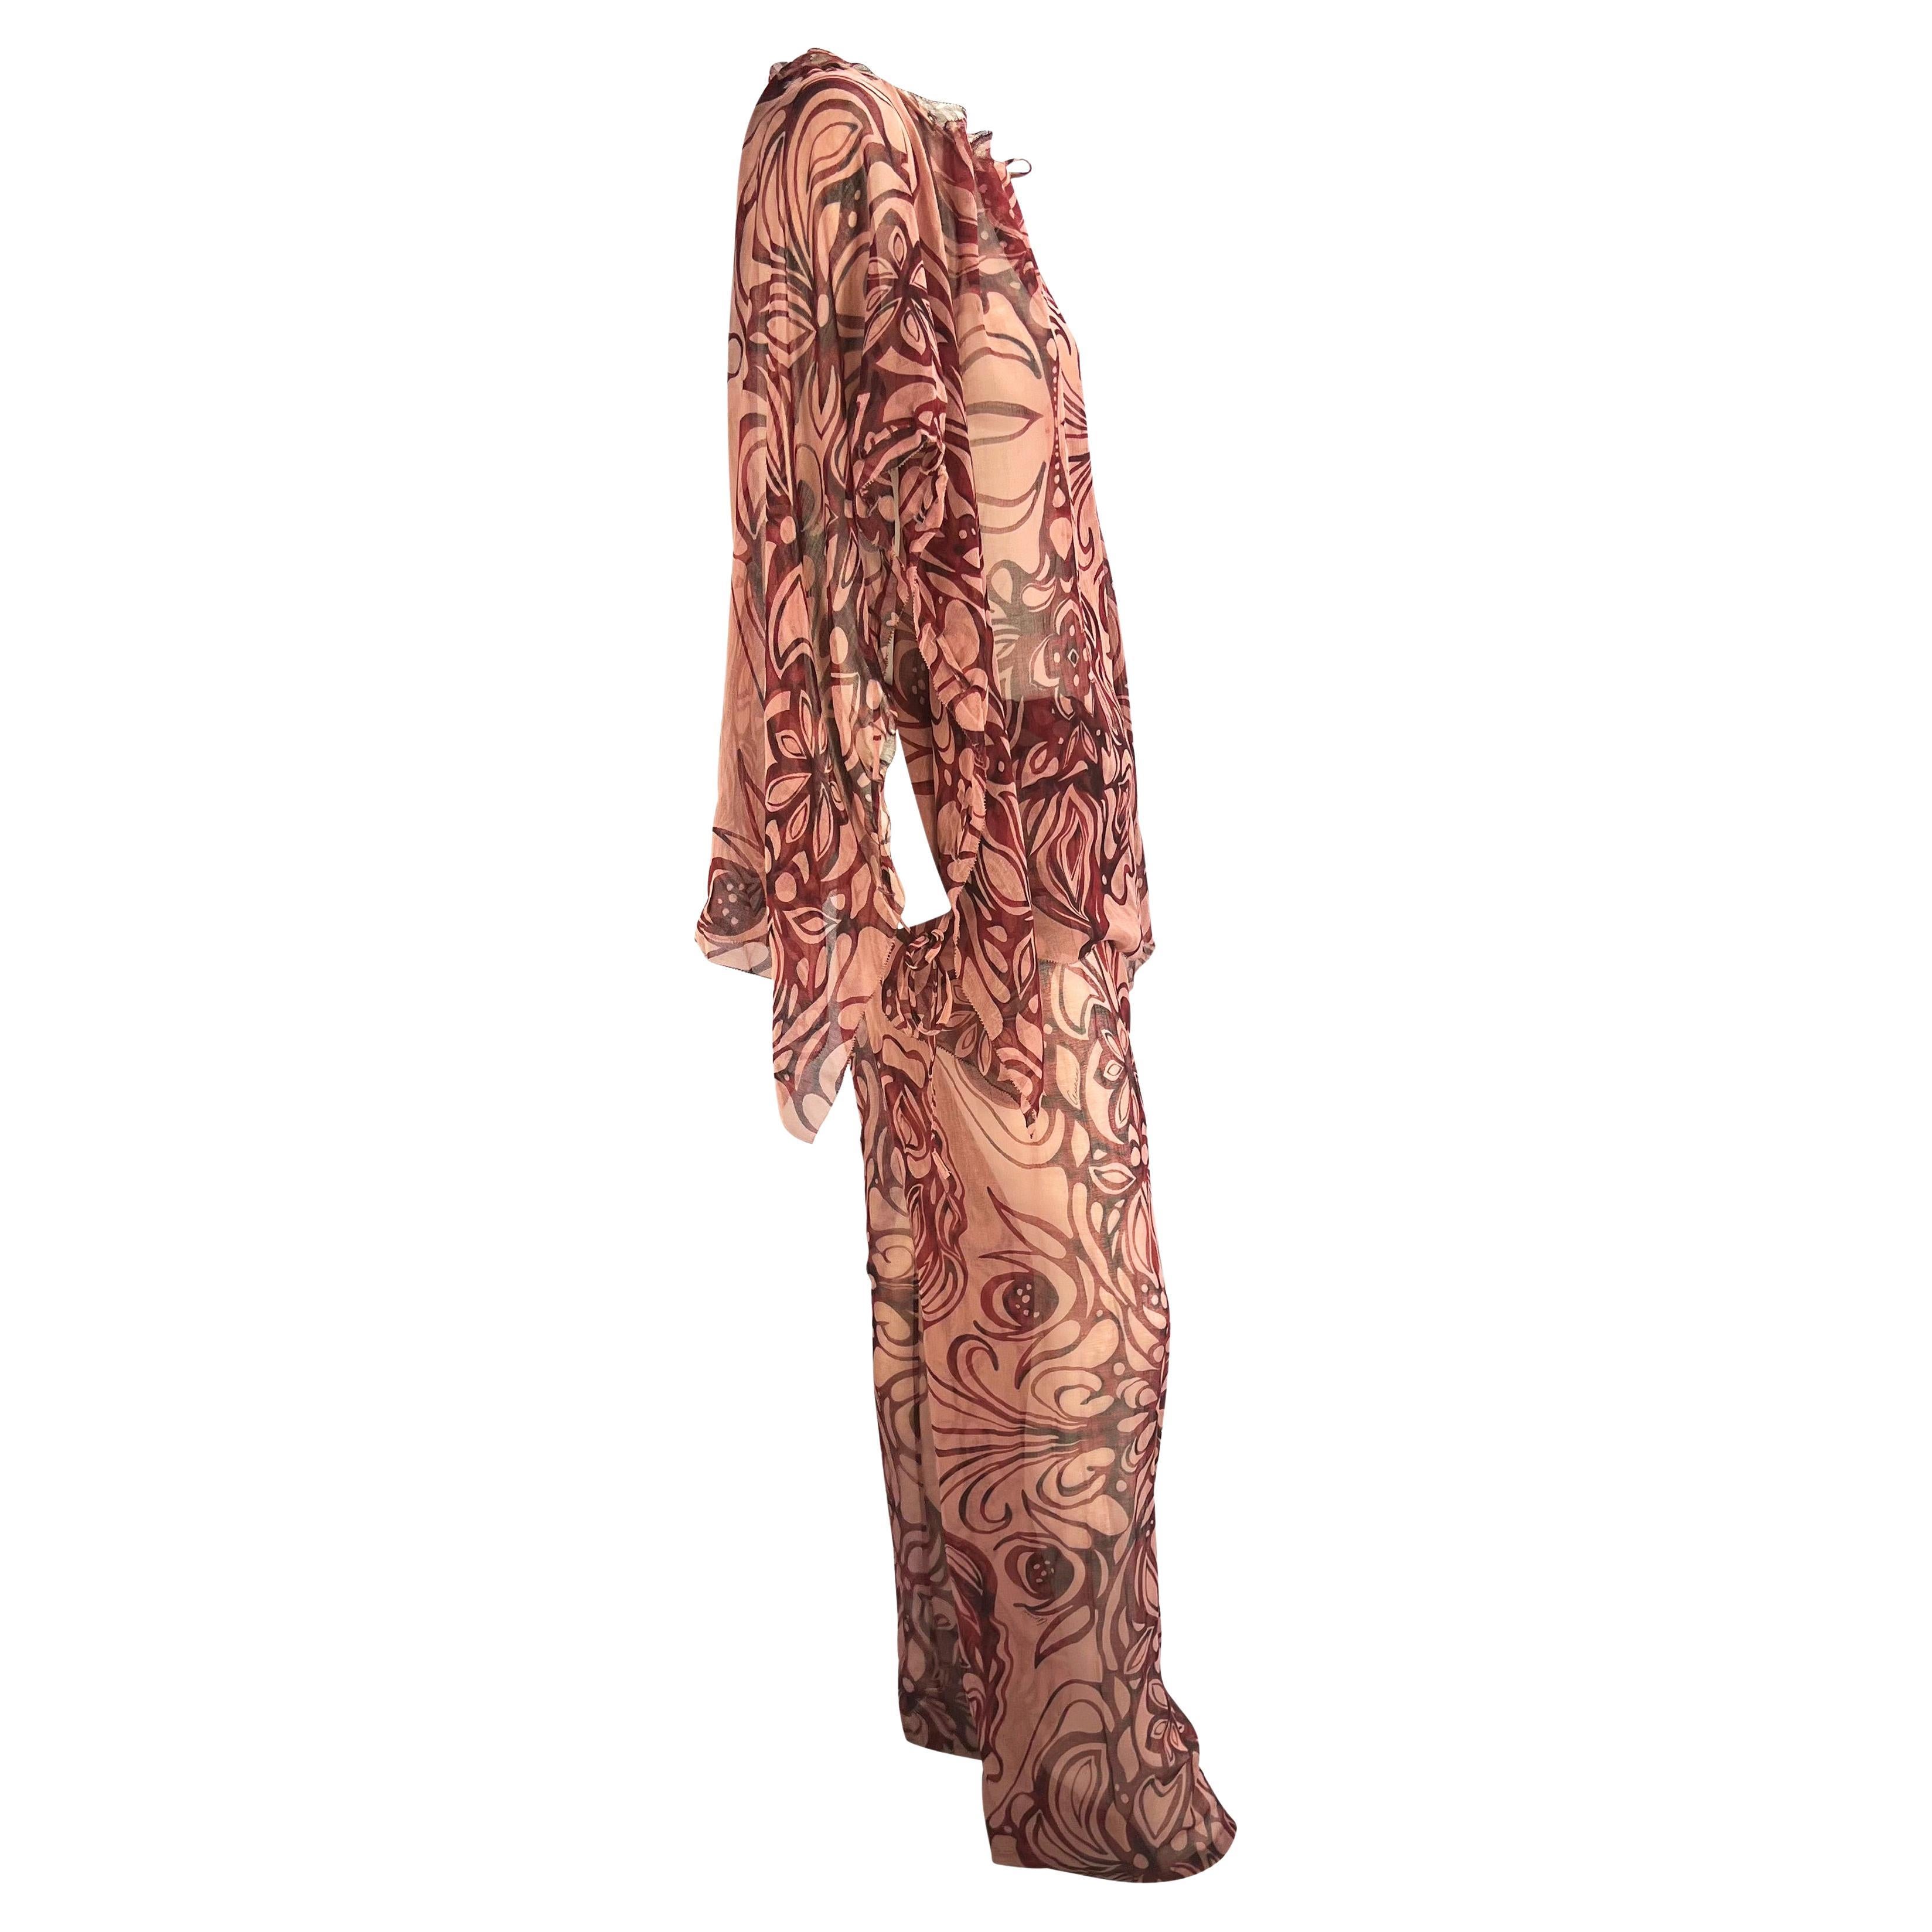 Brown S/S 2002 Gucci by Tom Ford Sheer Floral Tattoo Beach Coverup Pant Set NWT For Sale